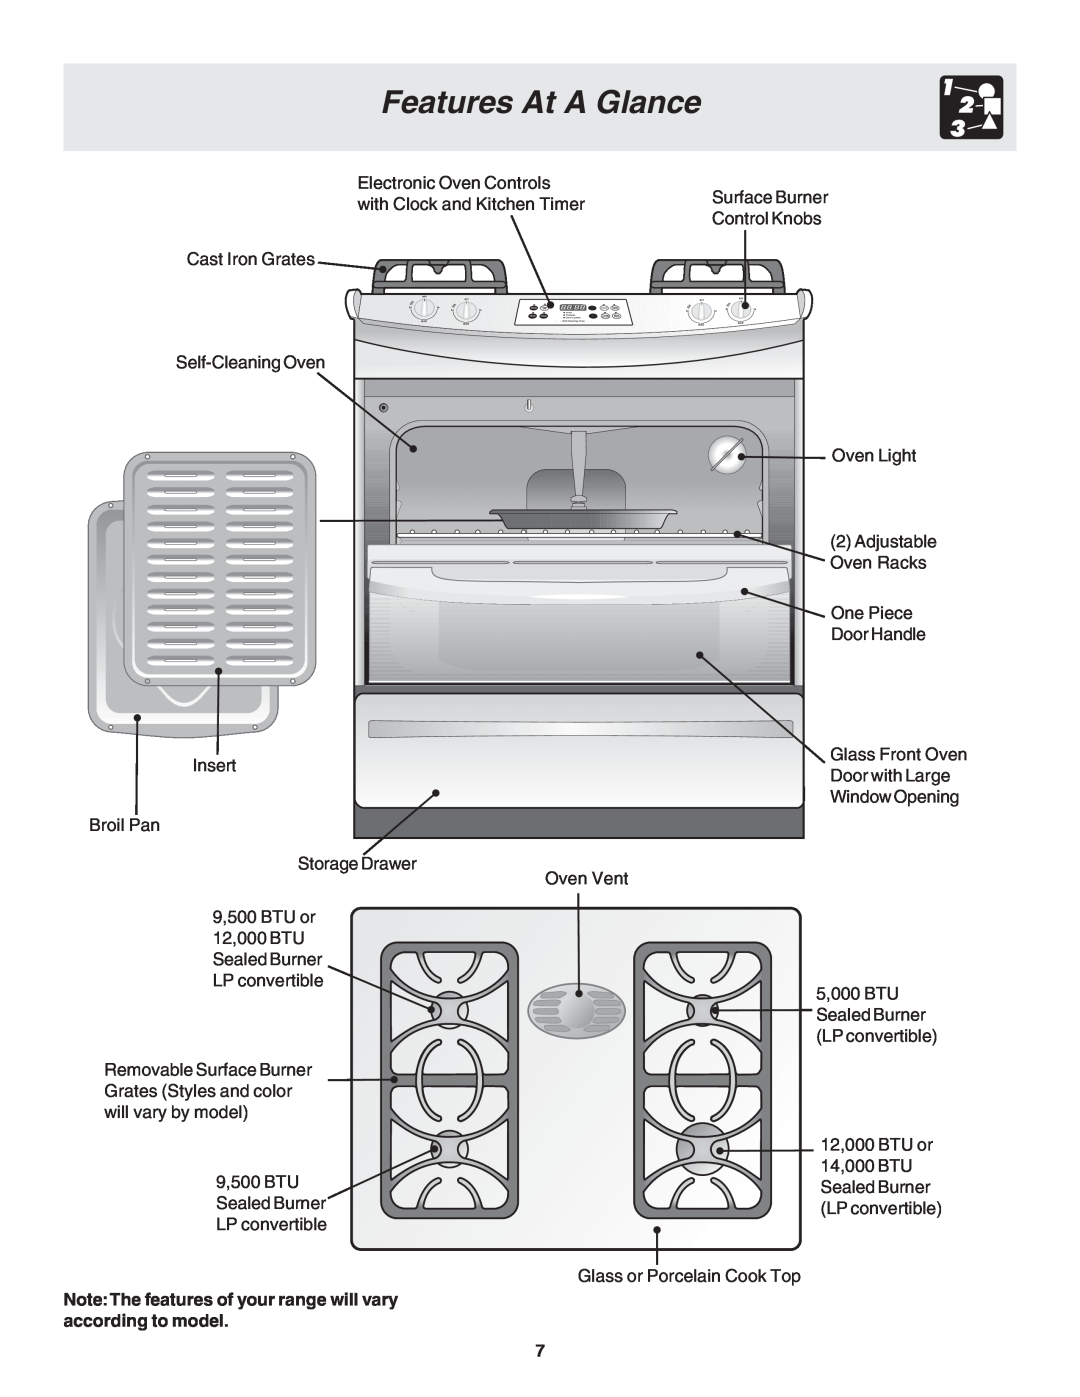 Frigidaire 318200879 manual Features At A Glance, NoteThe features of your range will vary according to model 